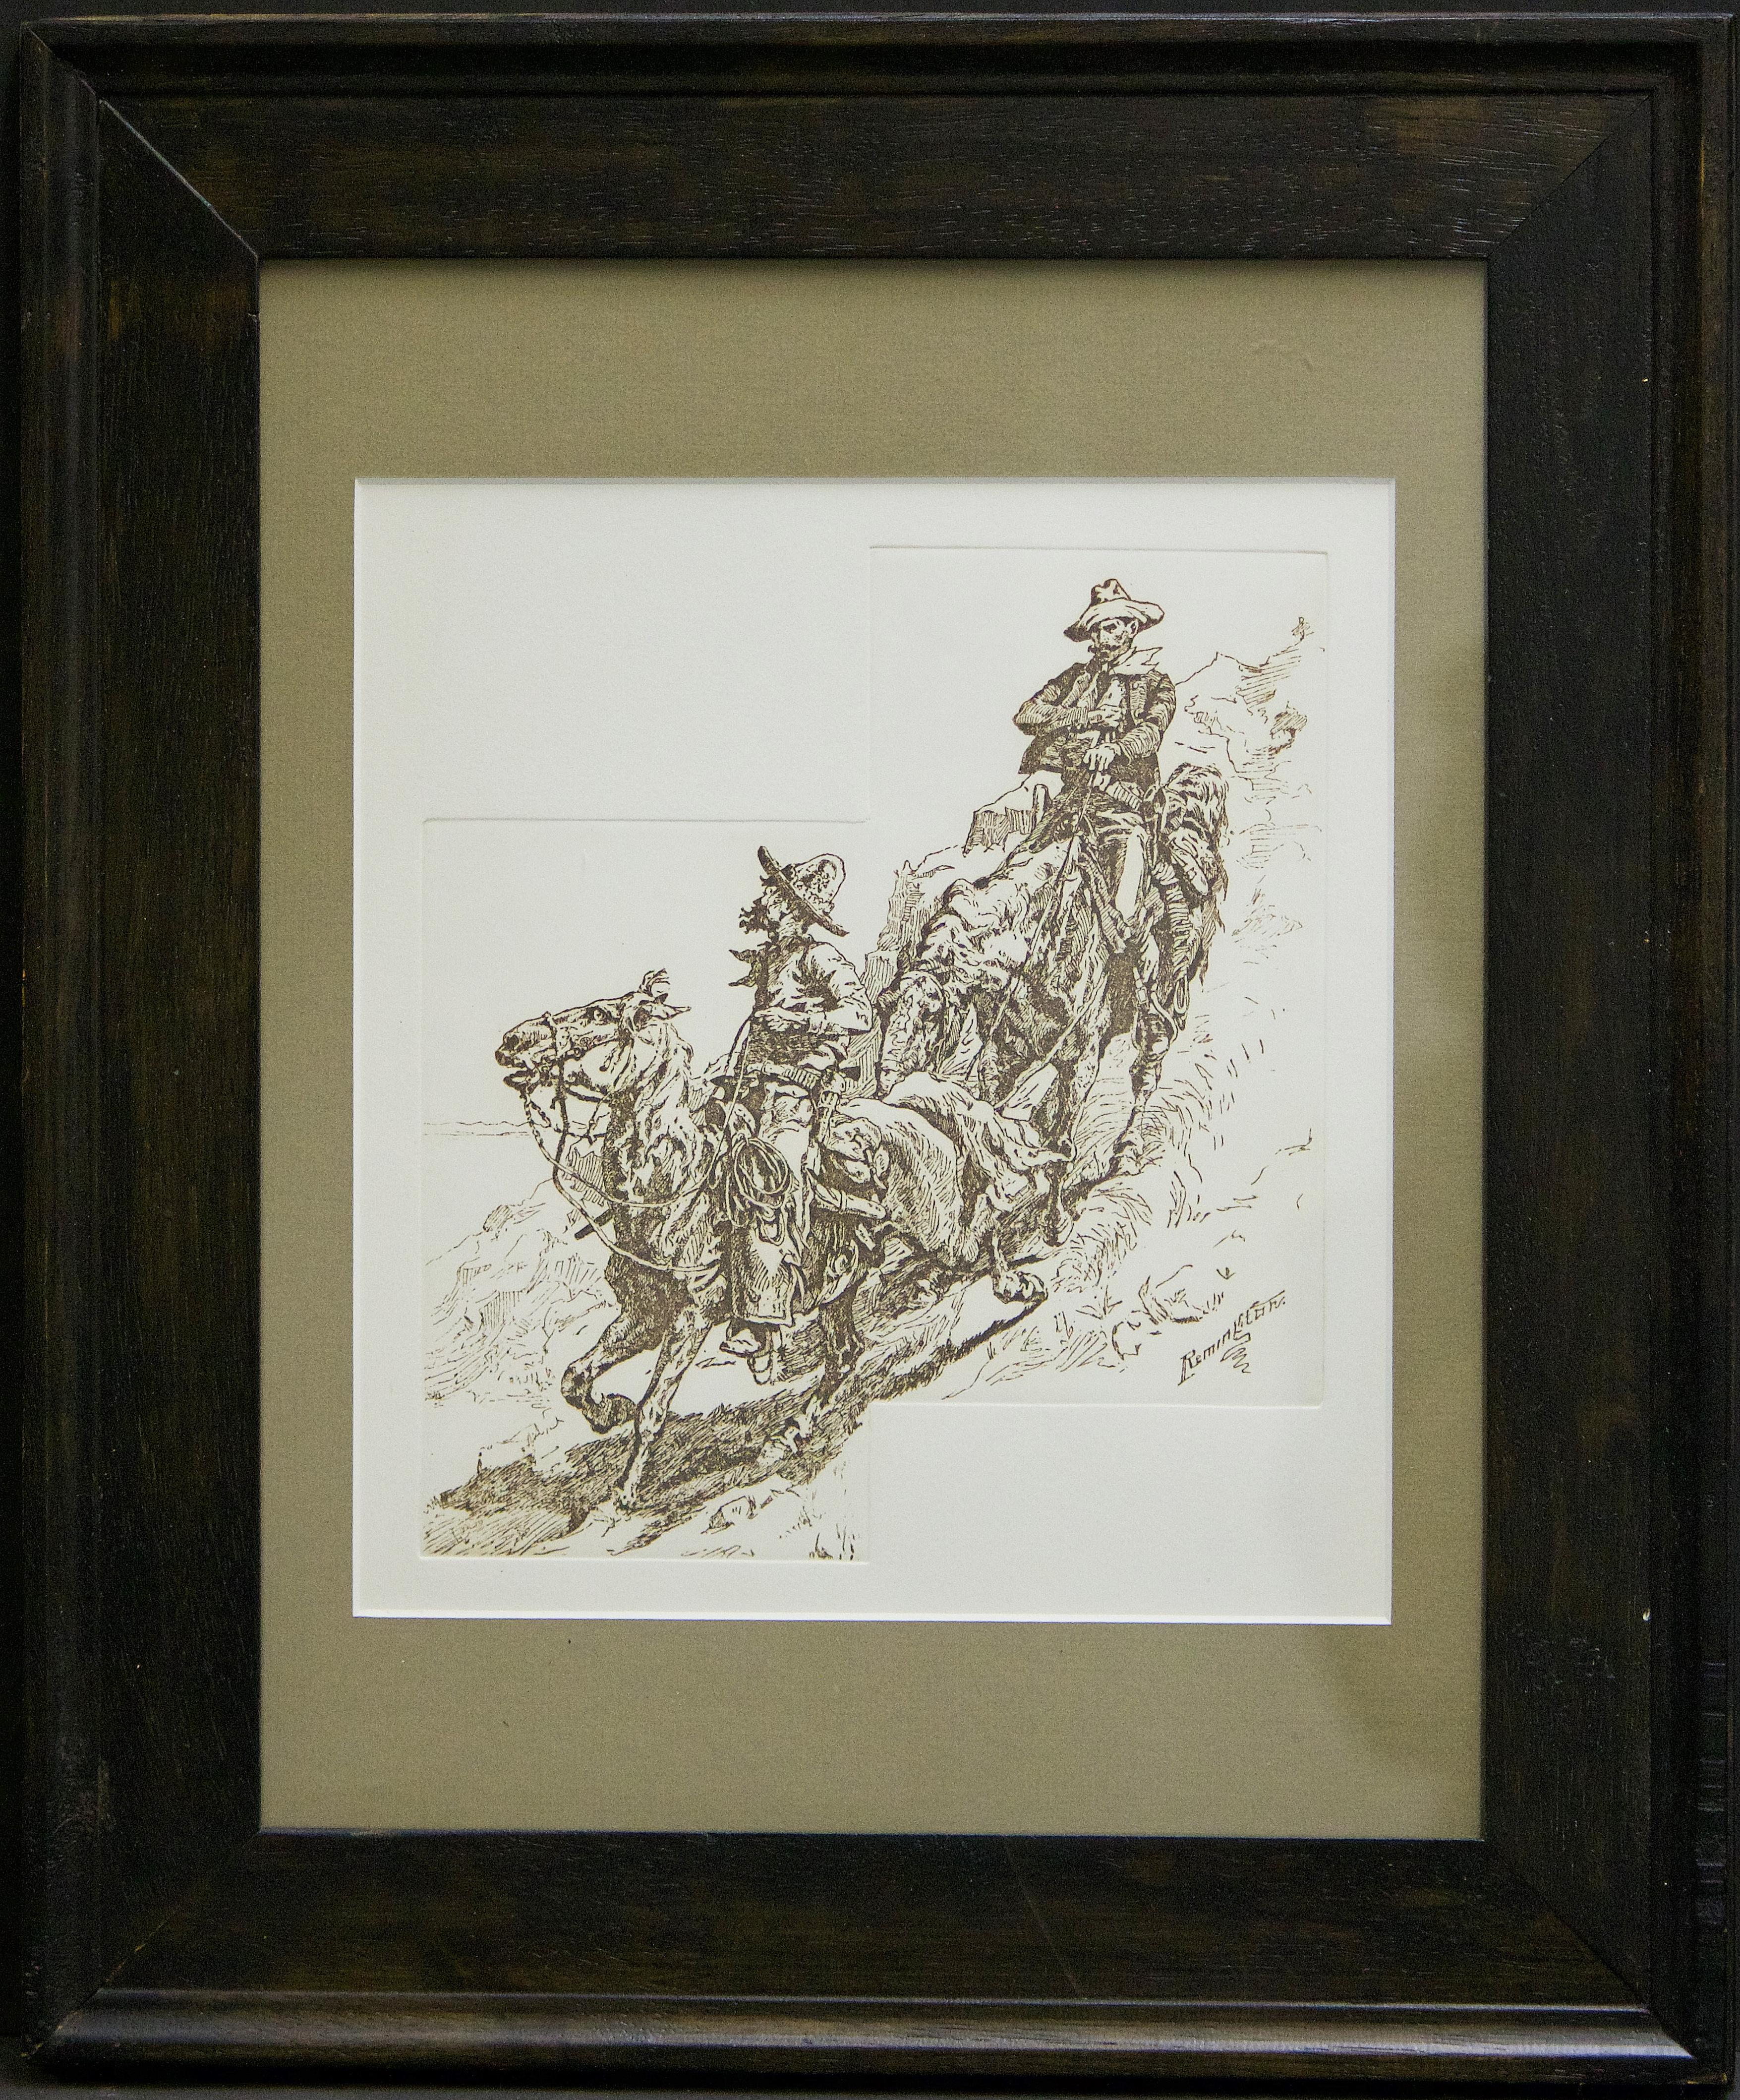 Frederic Remington Portrait Print - (Title Unknown) Framed, Embossed Print. Plate-Signed by the Artist